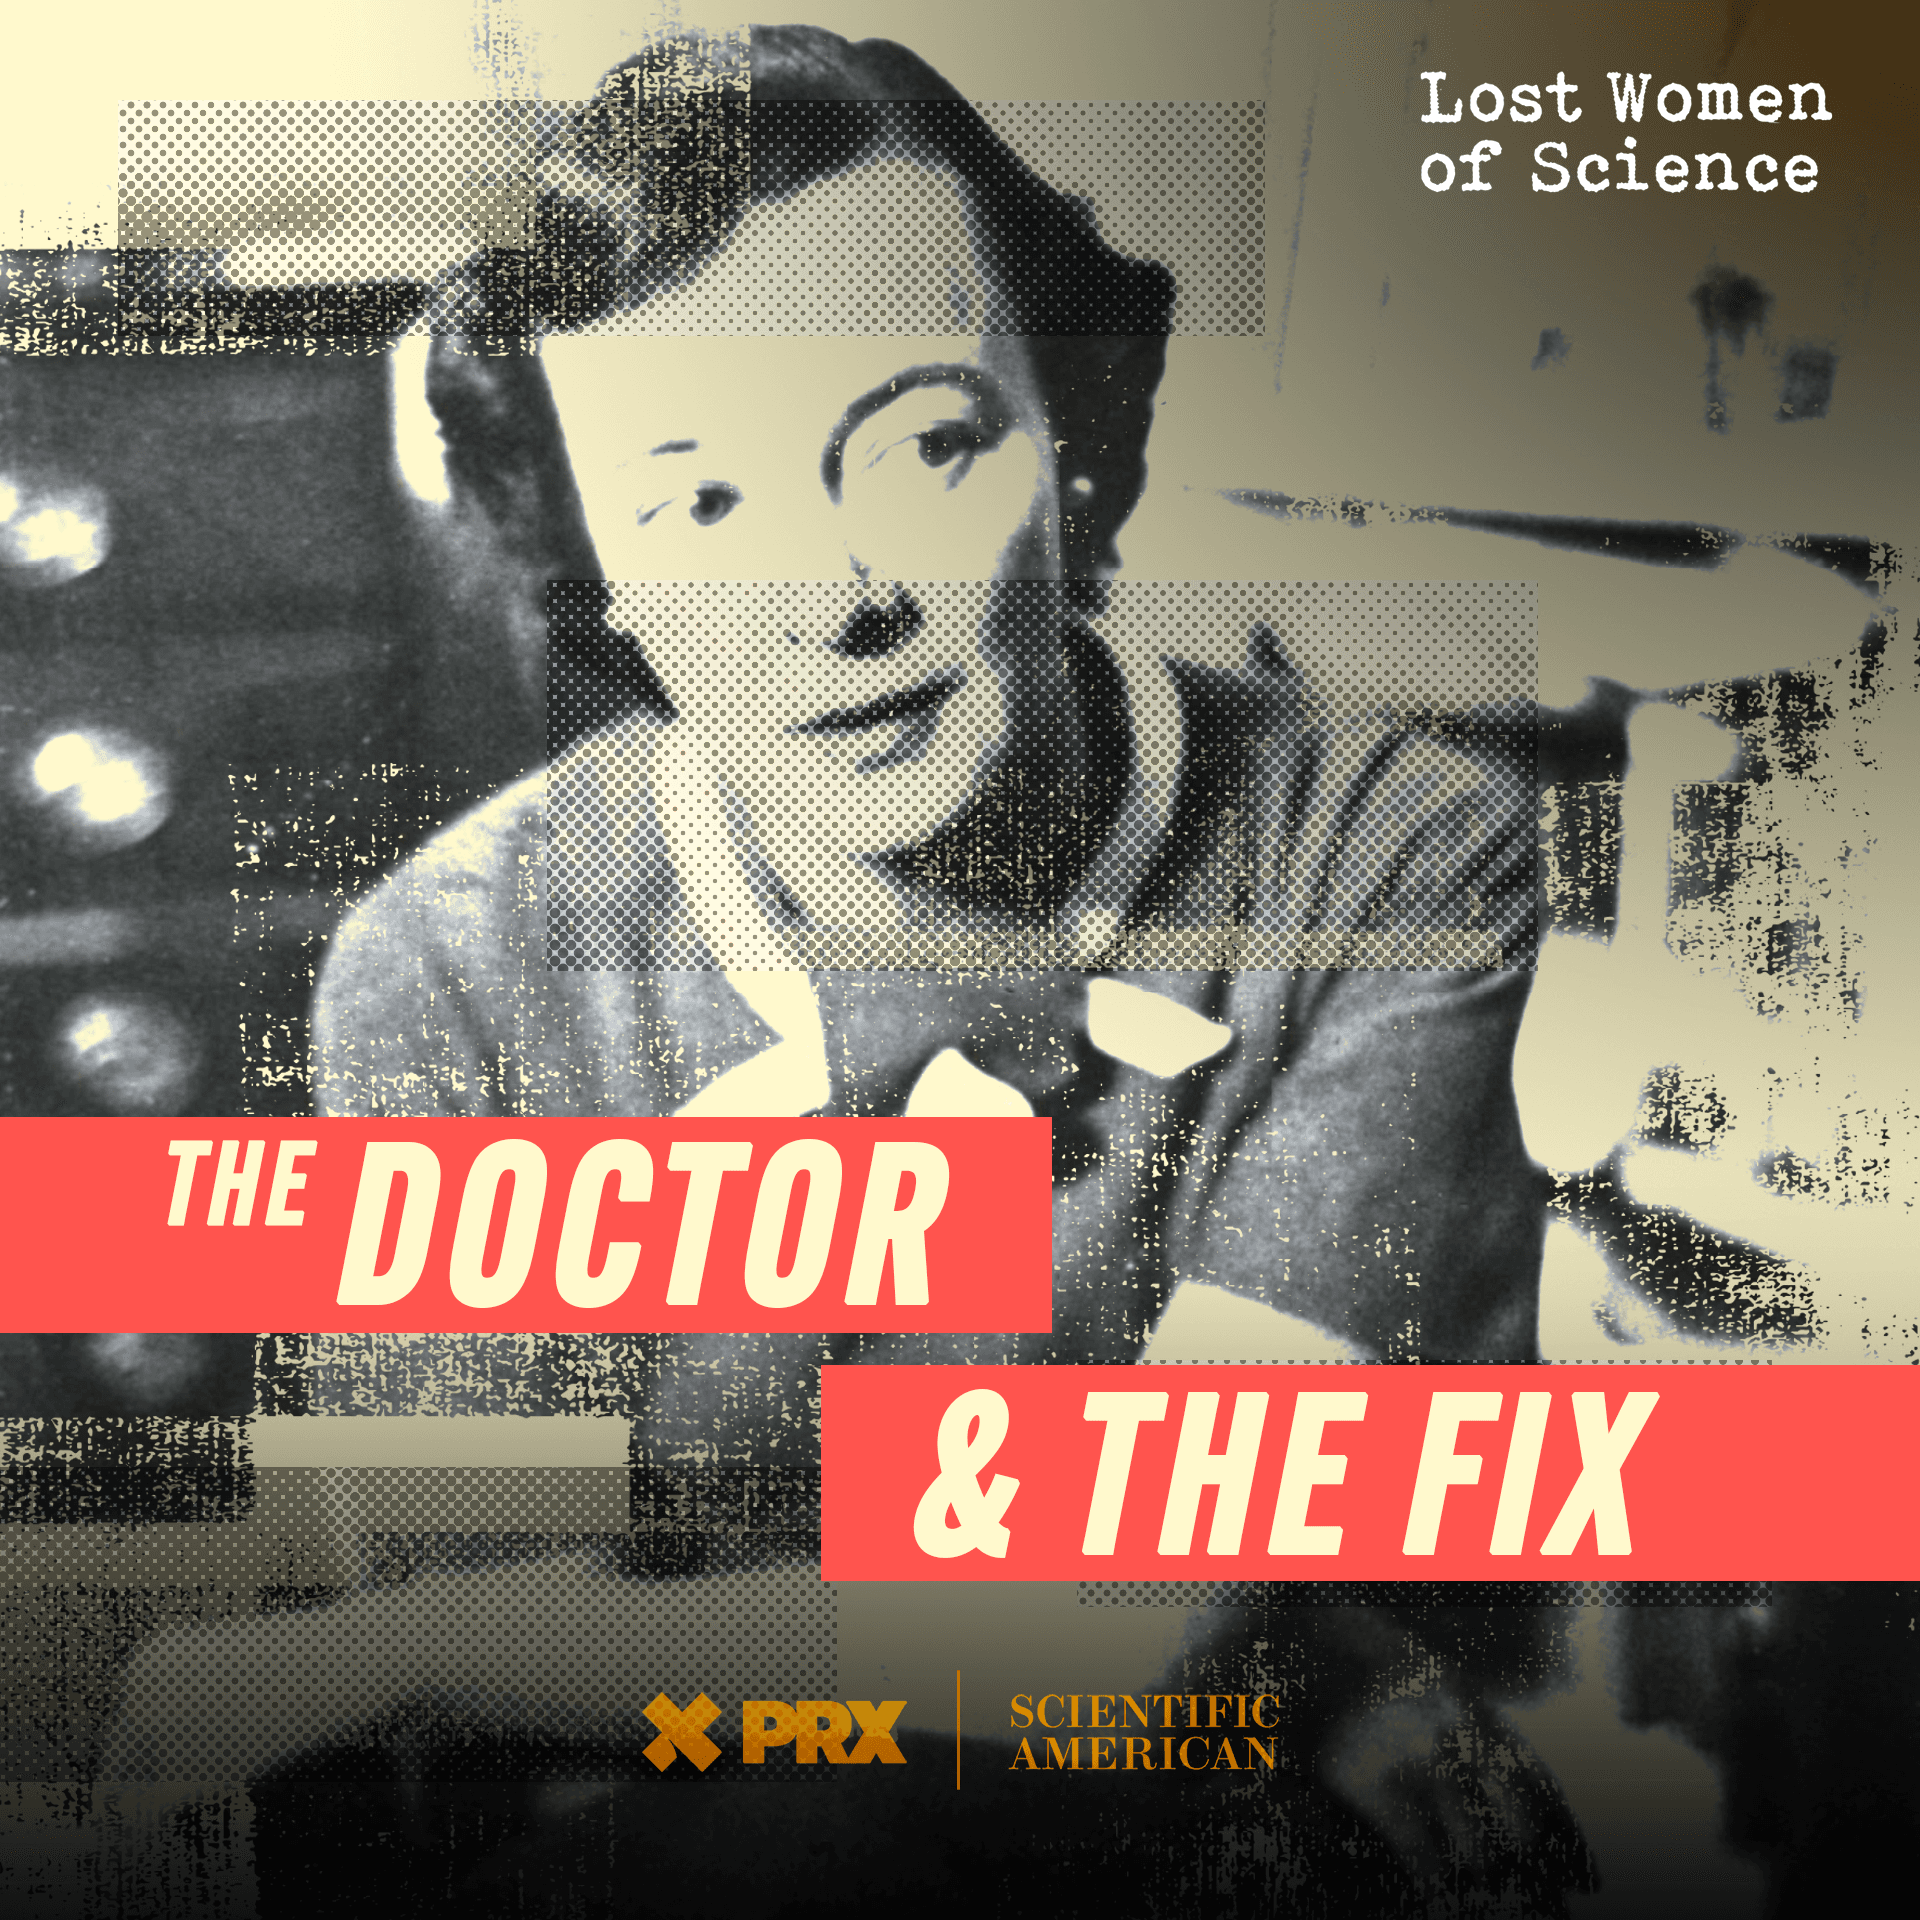 Thumbnail for "The Doctor and the Fix: Chapter 1".